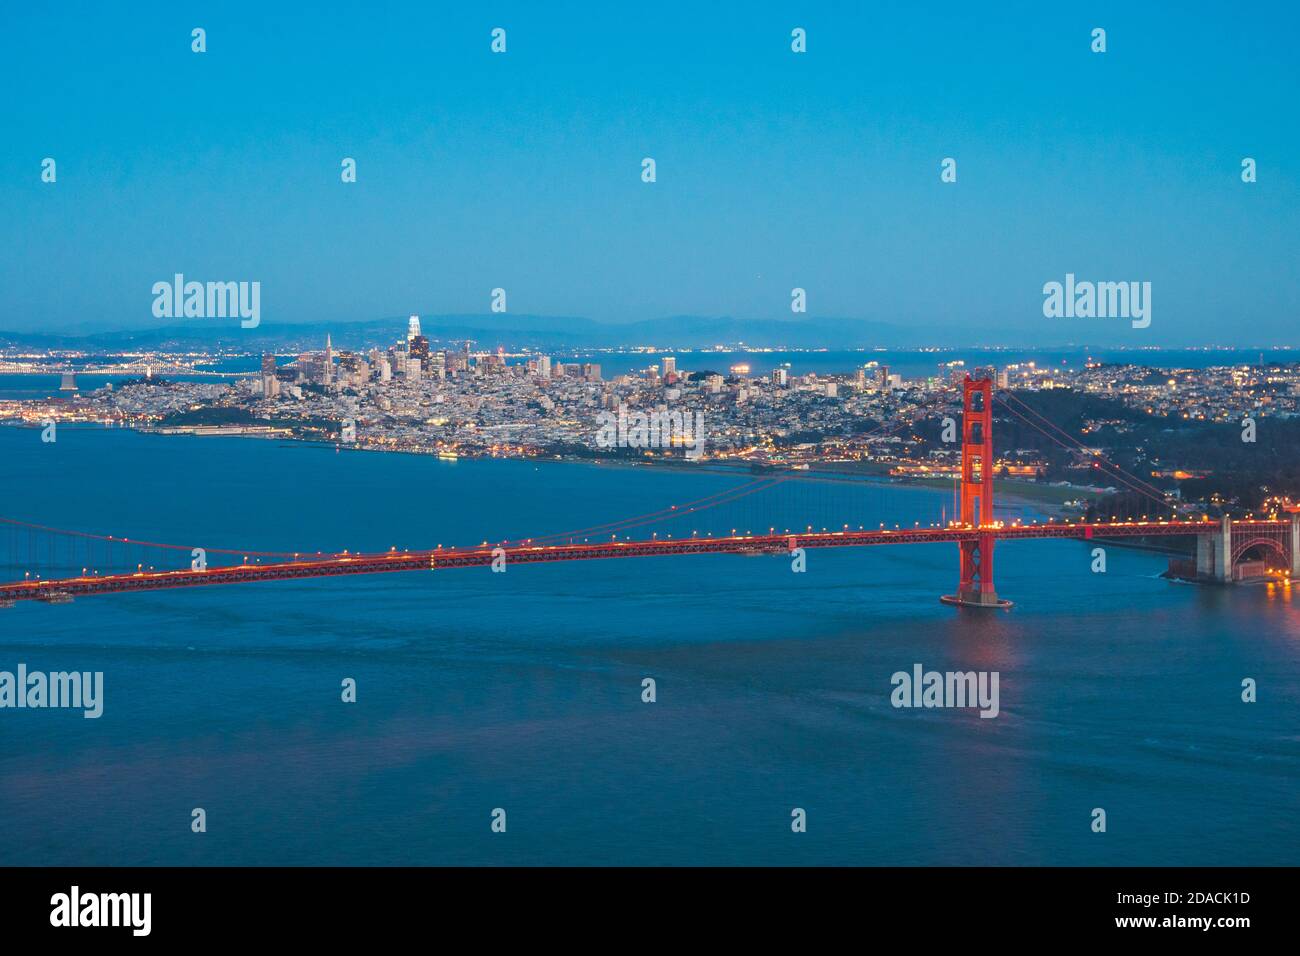 View of the beautiful famous Golden Gate Bridge in San Francisco, California, United States in the evening Stock Photo